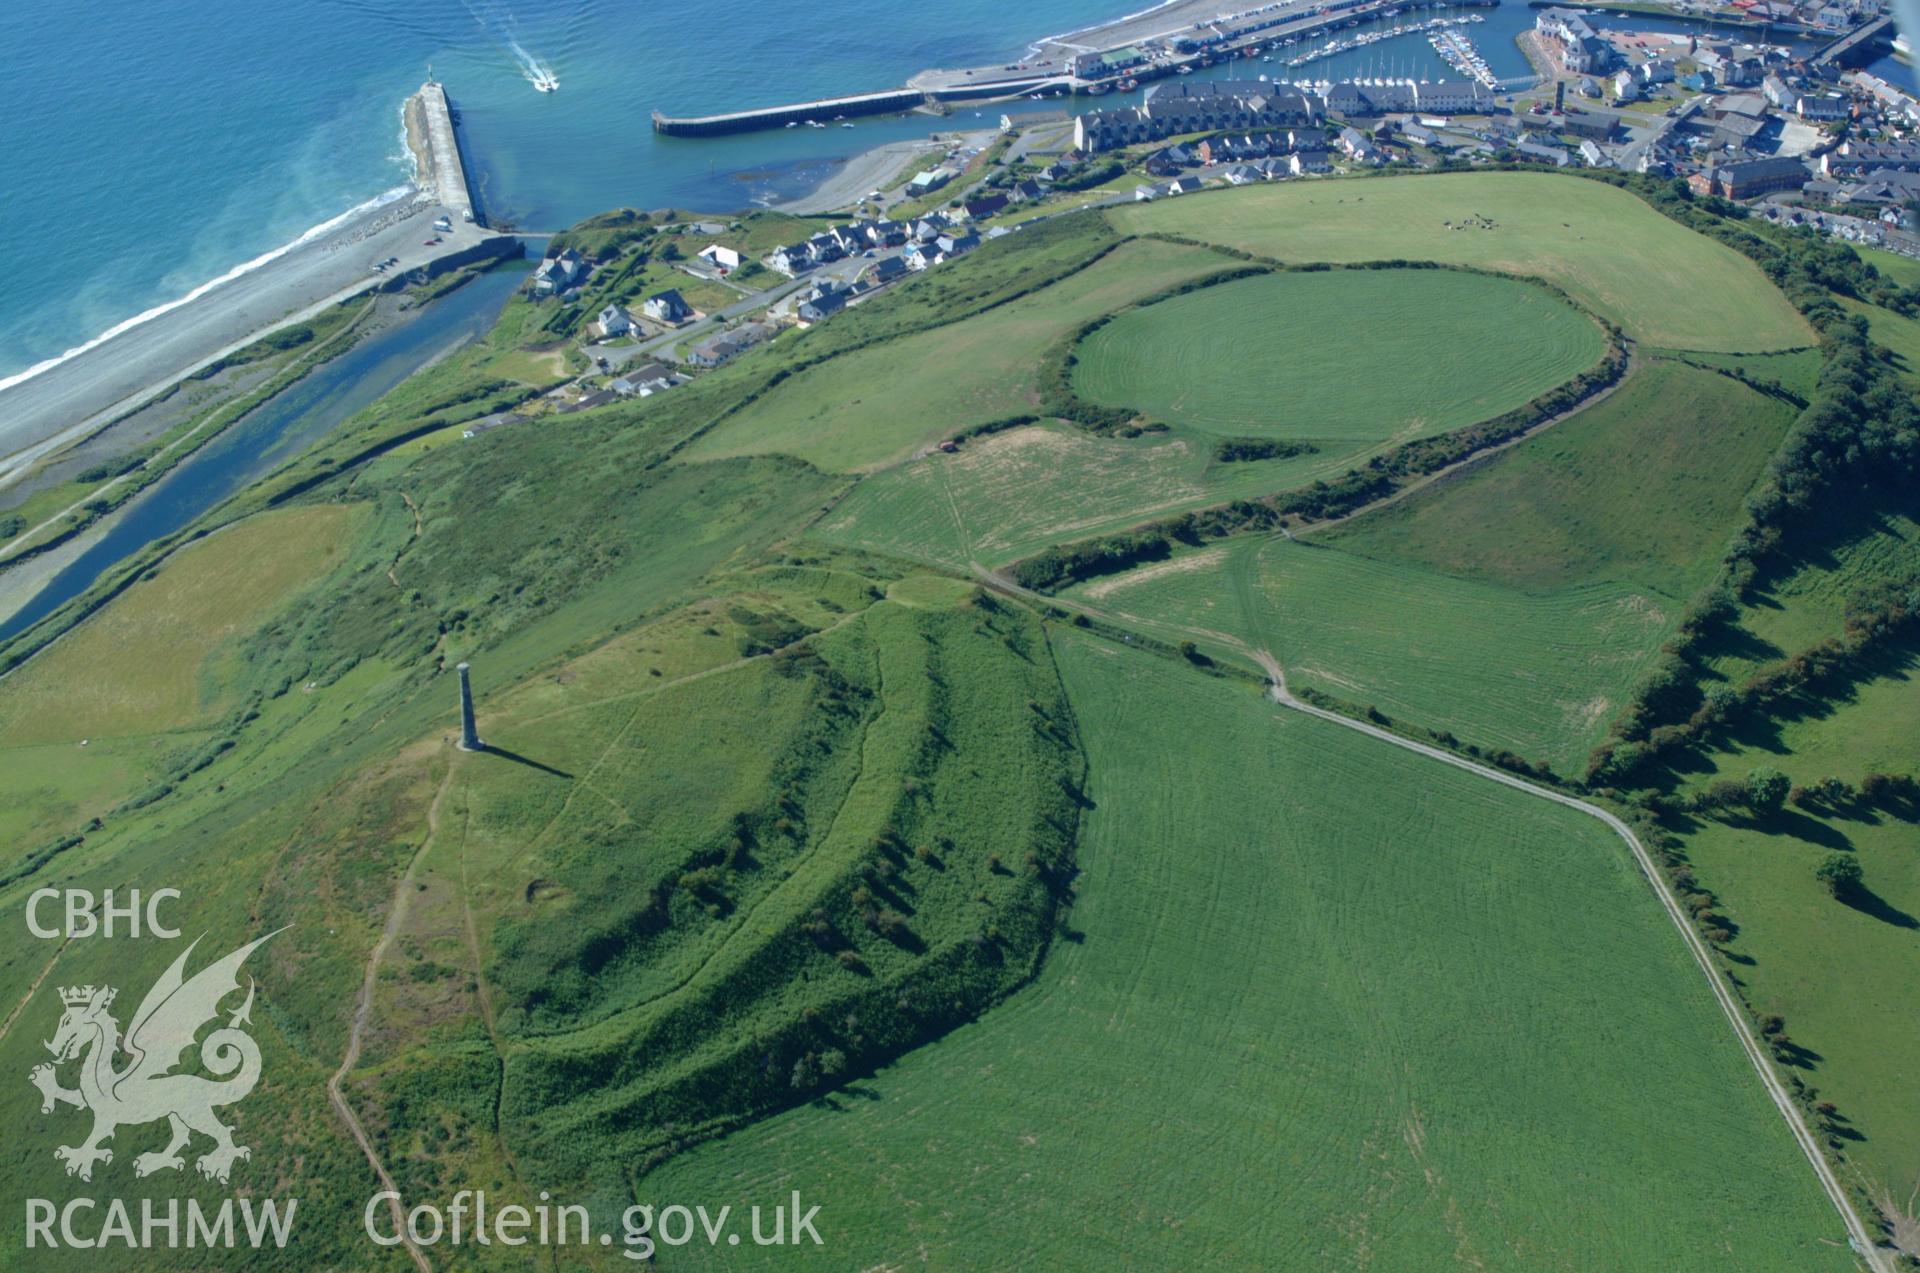 RCAHMW colour oblique aerial photograph of Pen Dinas Hillfort, Aberystwyth taken on 14/06/2004 by Toby Driver